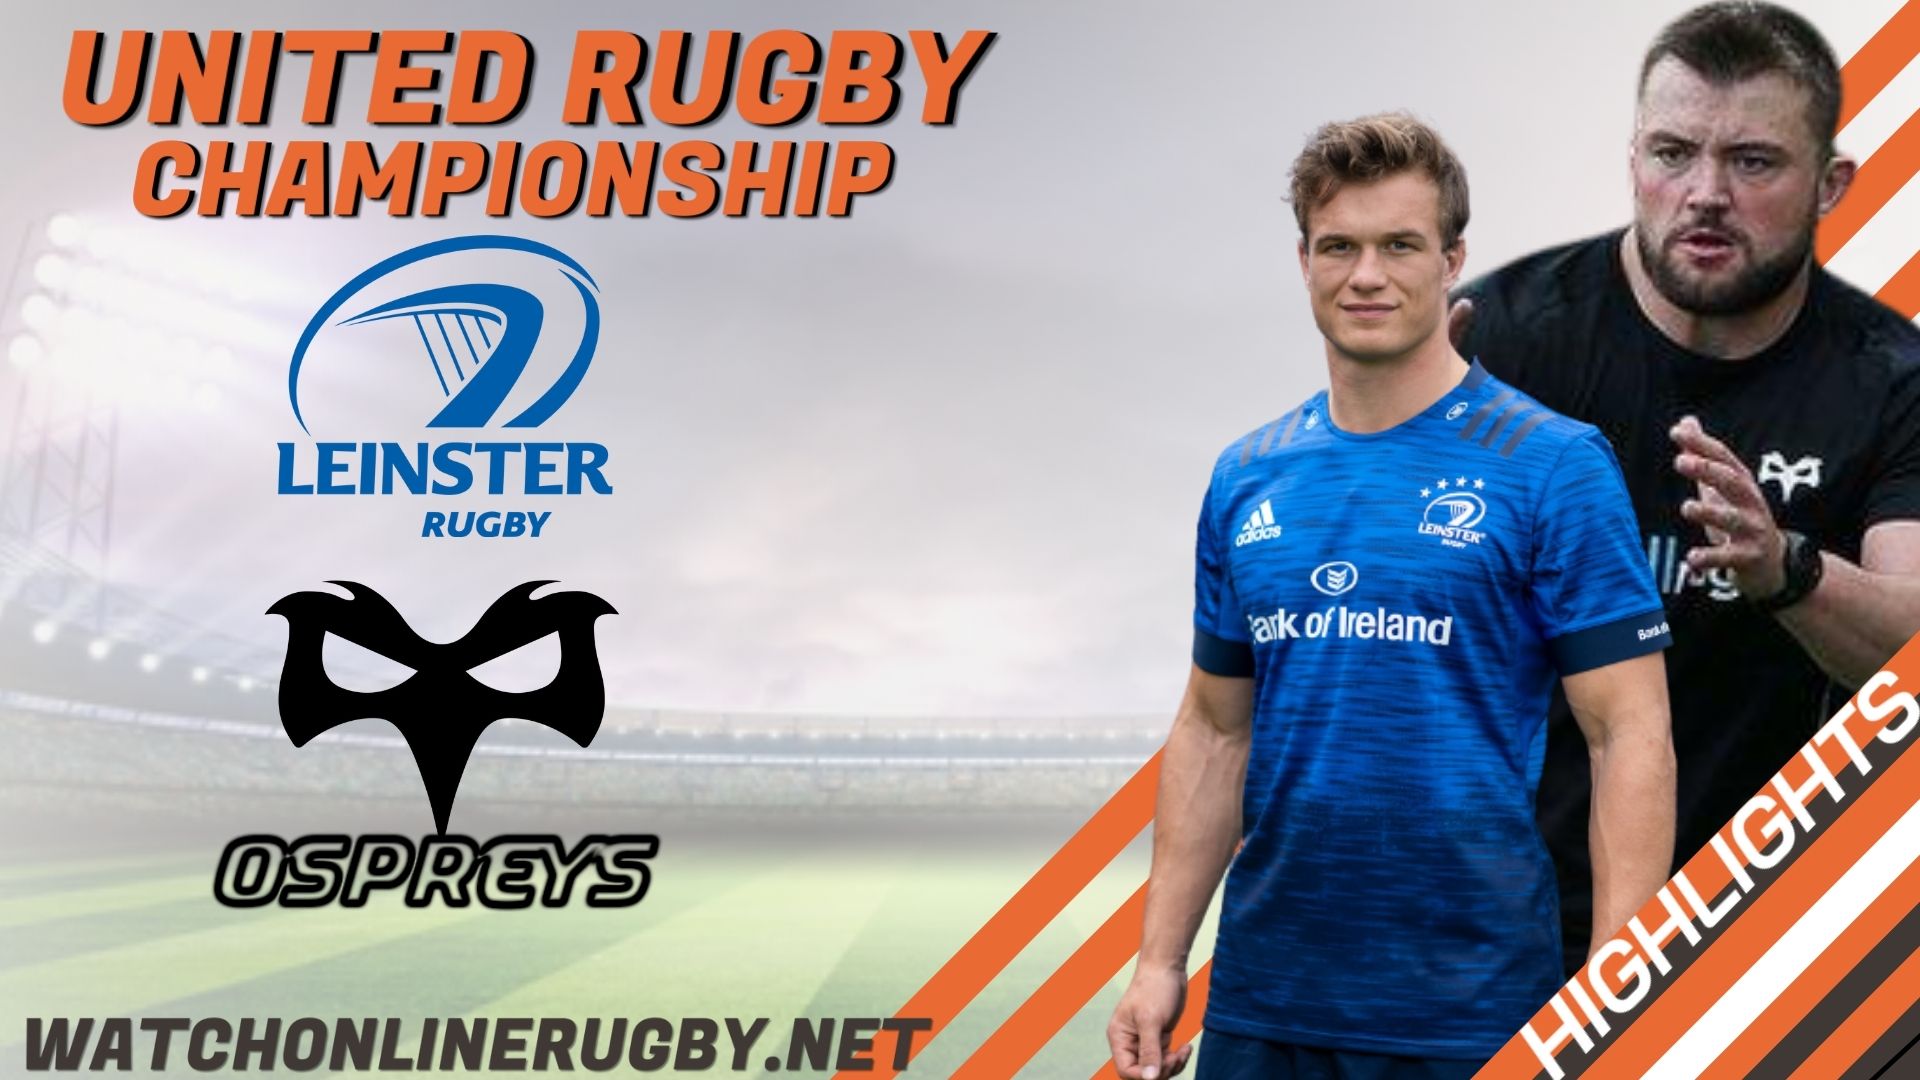 Leinster Vs Ospreys United Rugby Championship 2022 RD 12